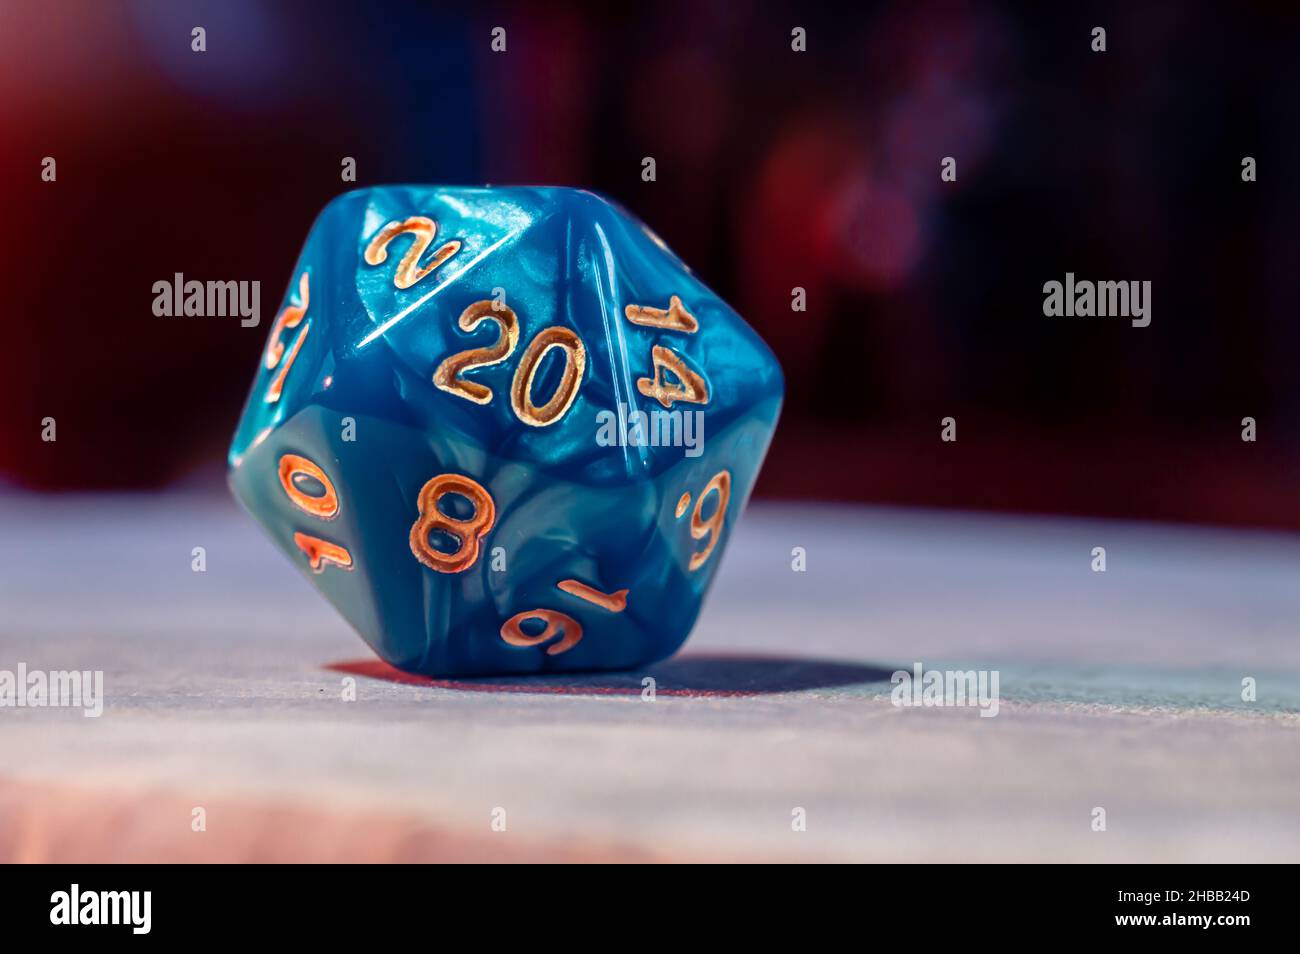 Close-up image of blue a role-playing gaming die with 20 sides. Stock Photo